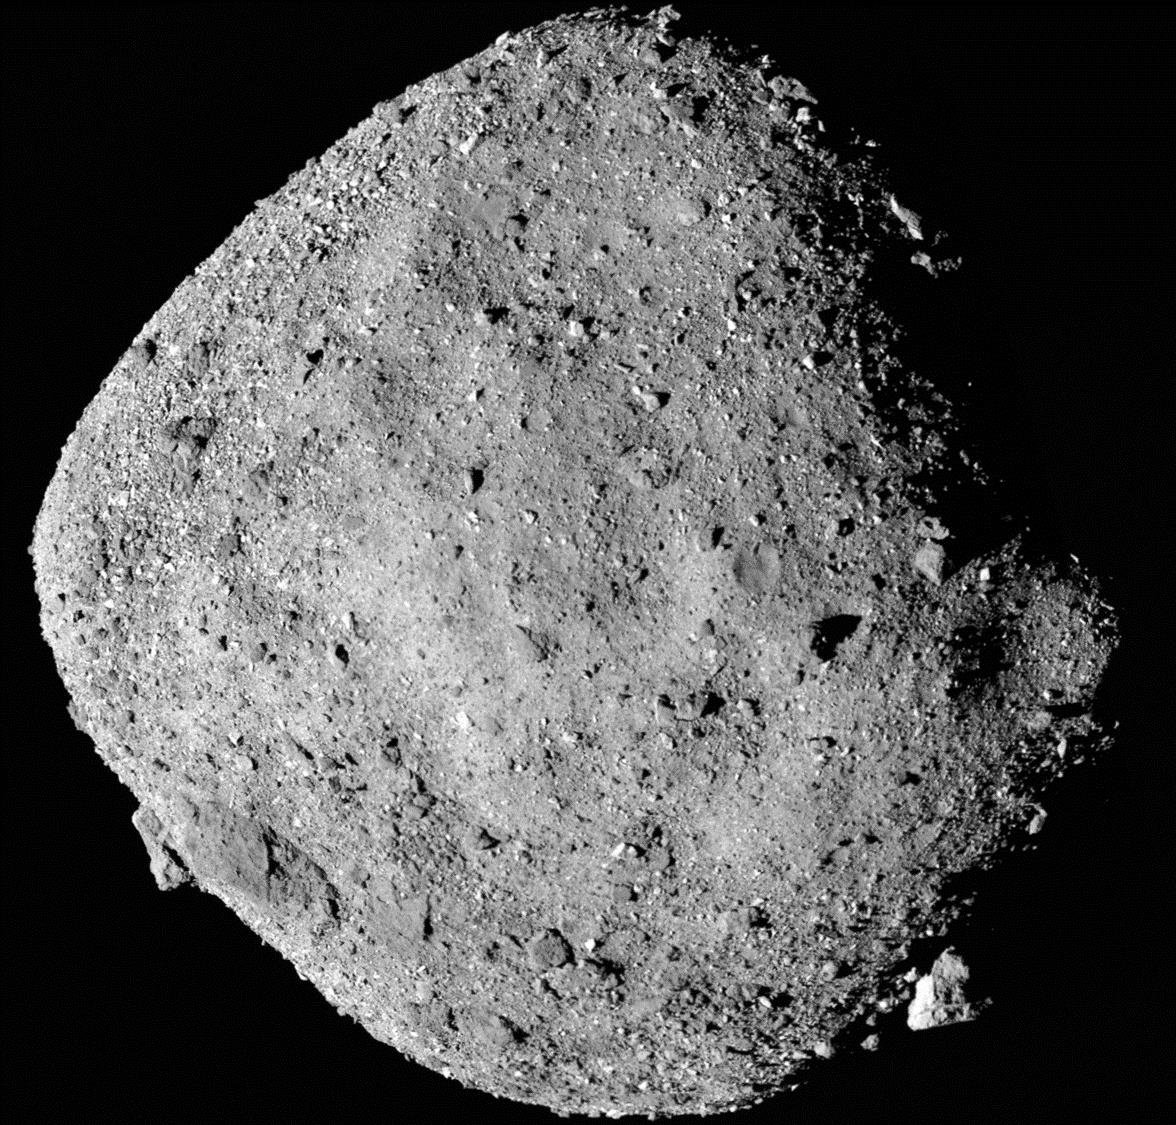 NASA’s spacecraft collects significant amount of Asteroid Bennu